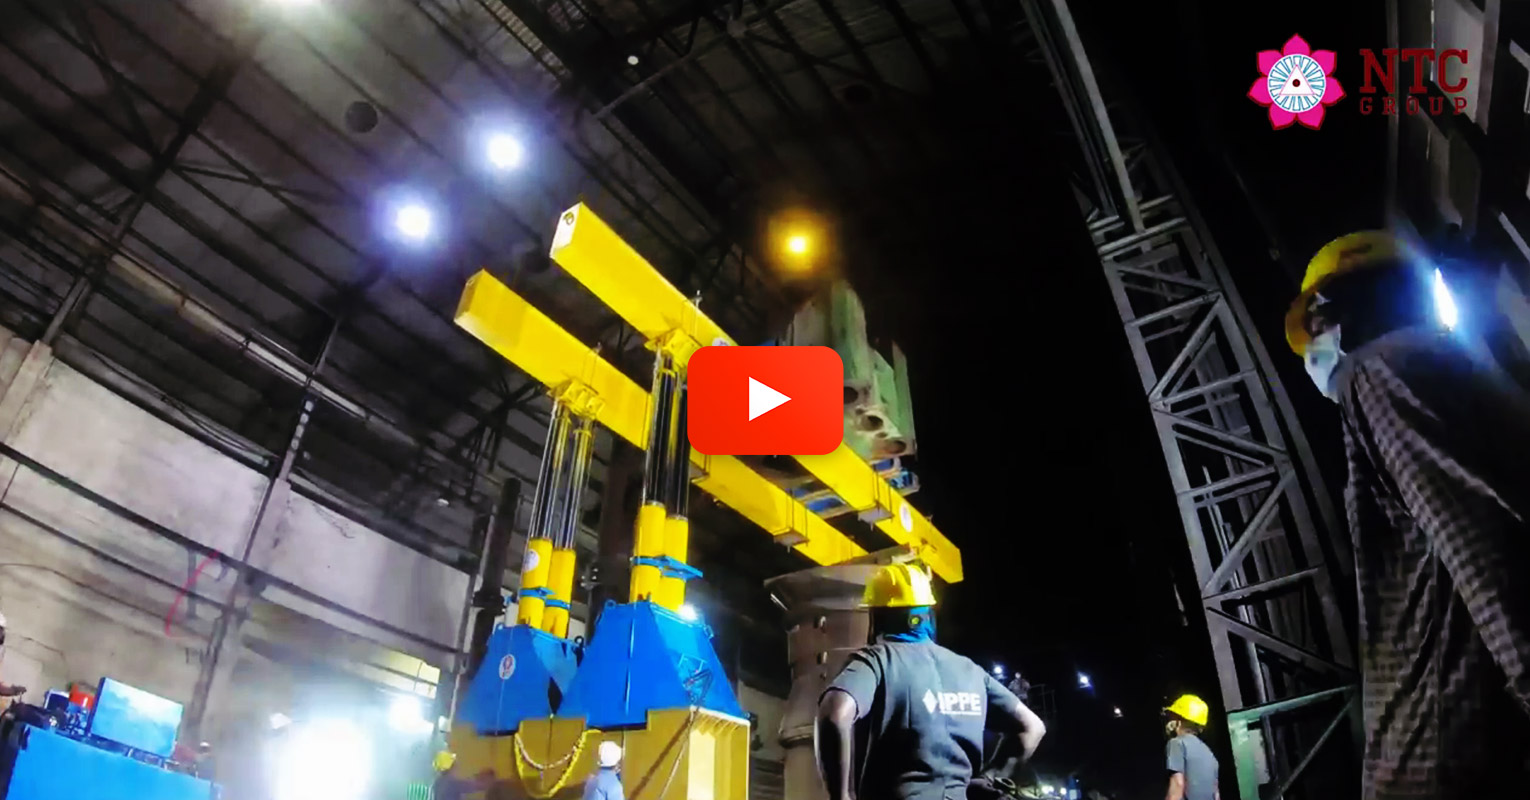 Video - Power Press Engineers (Part of NTC Group) used their 800T Hydraulic Gantry to Dismantle and Assemble a Massive 3500 MT Hydraulic Open Die Forging machine